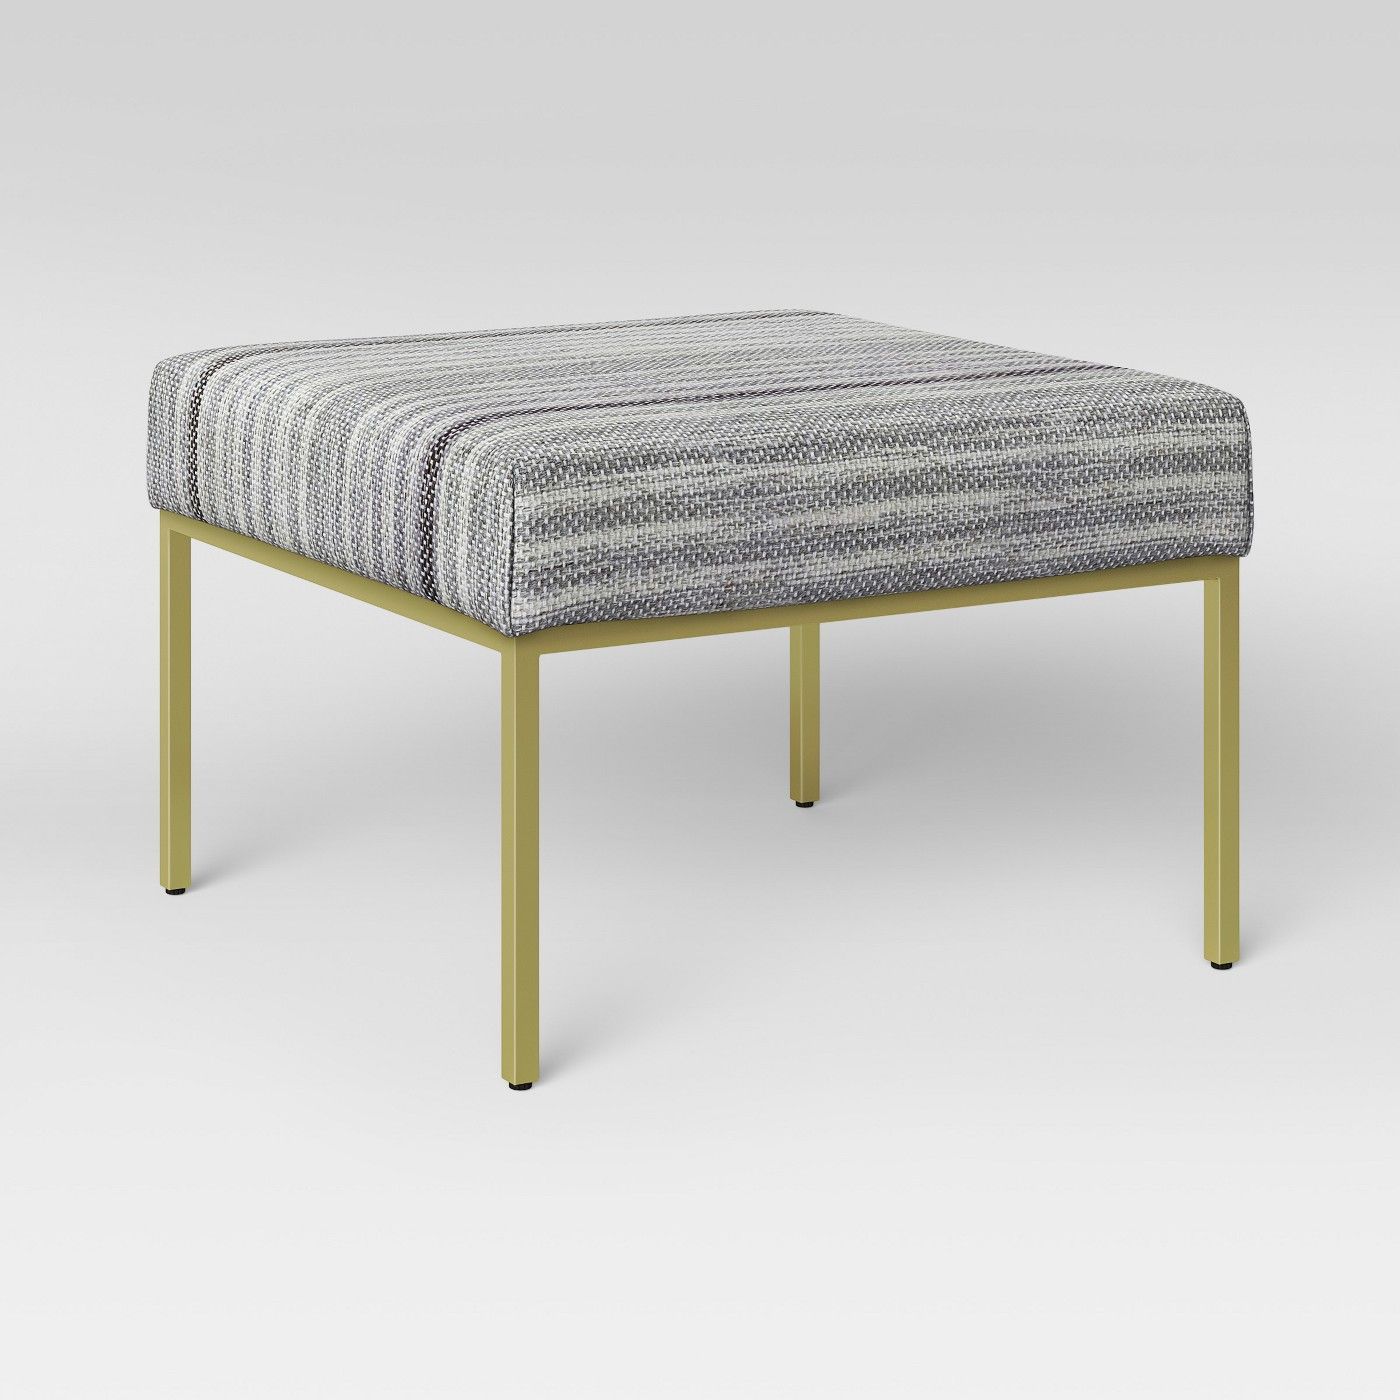 Ludlow Square Fabric Upholstered Ottoman Gold Legs – Threshold In White Wool Square Pouf Ottomans (View 18 of 20)